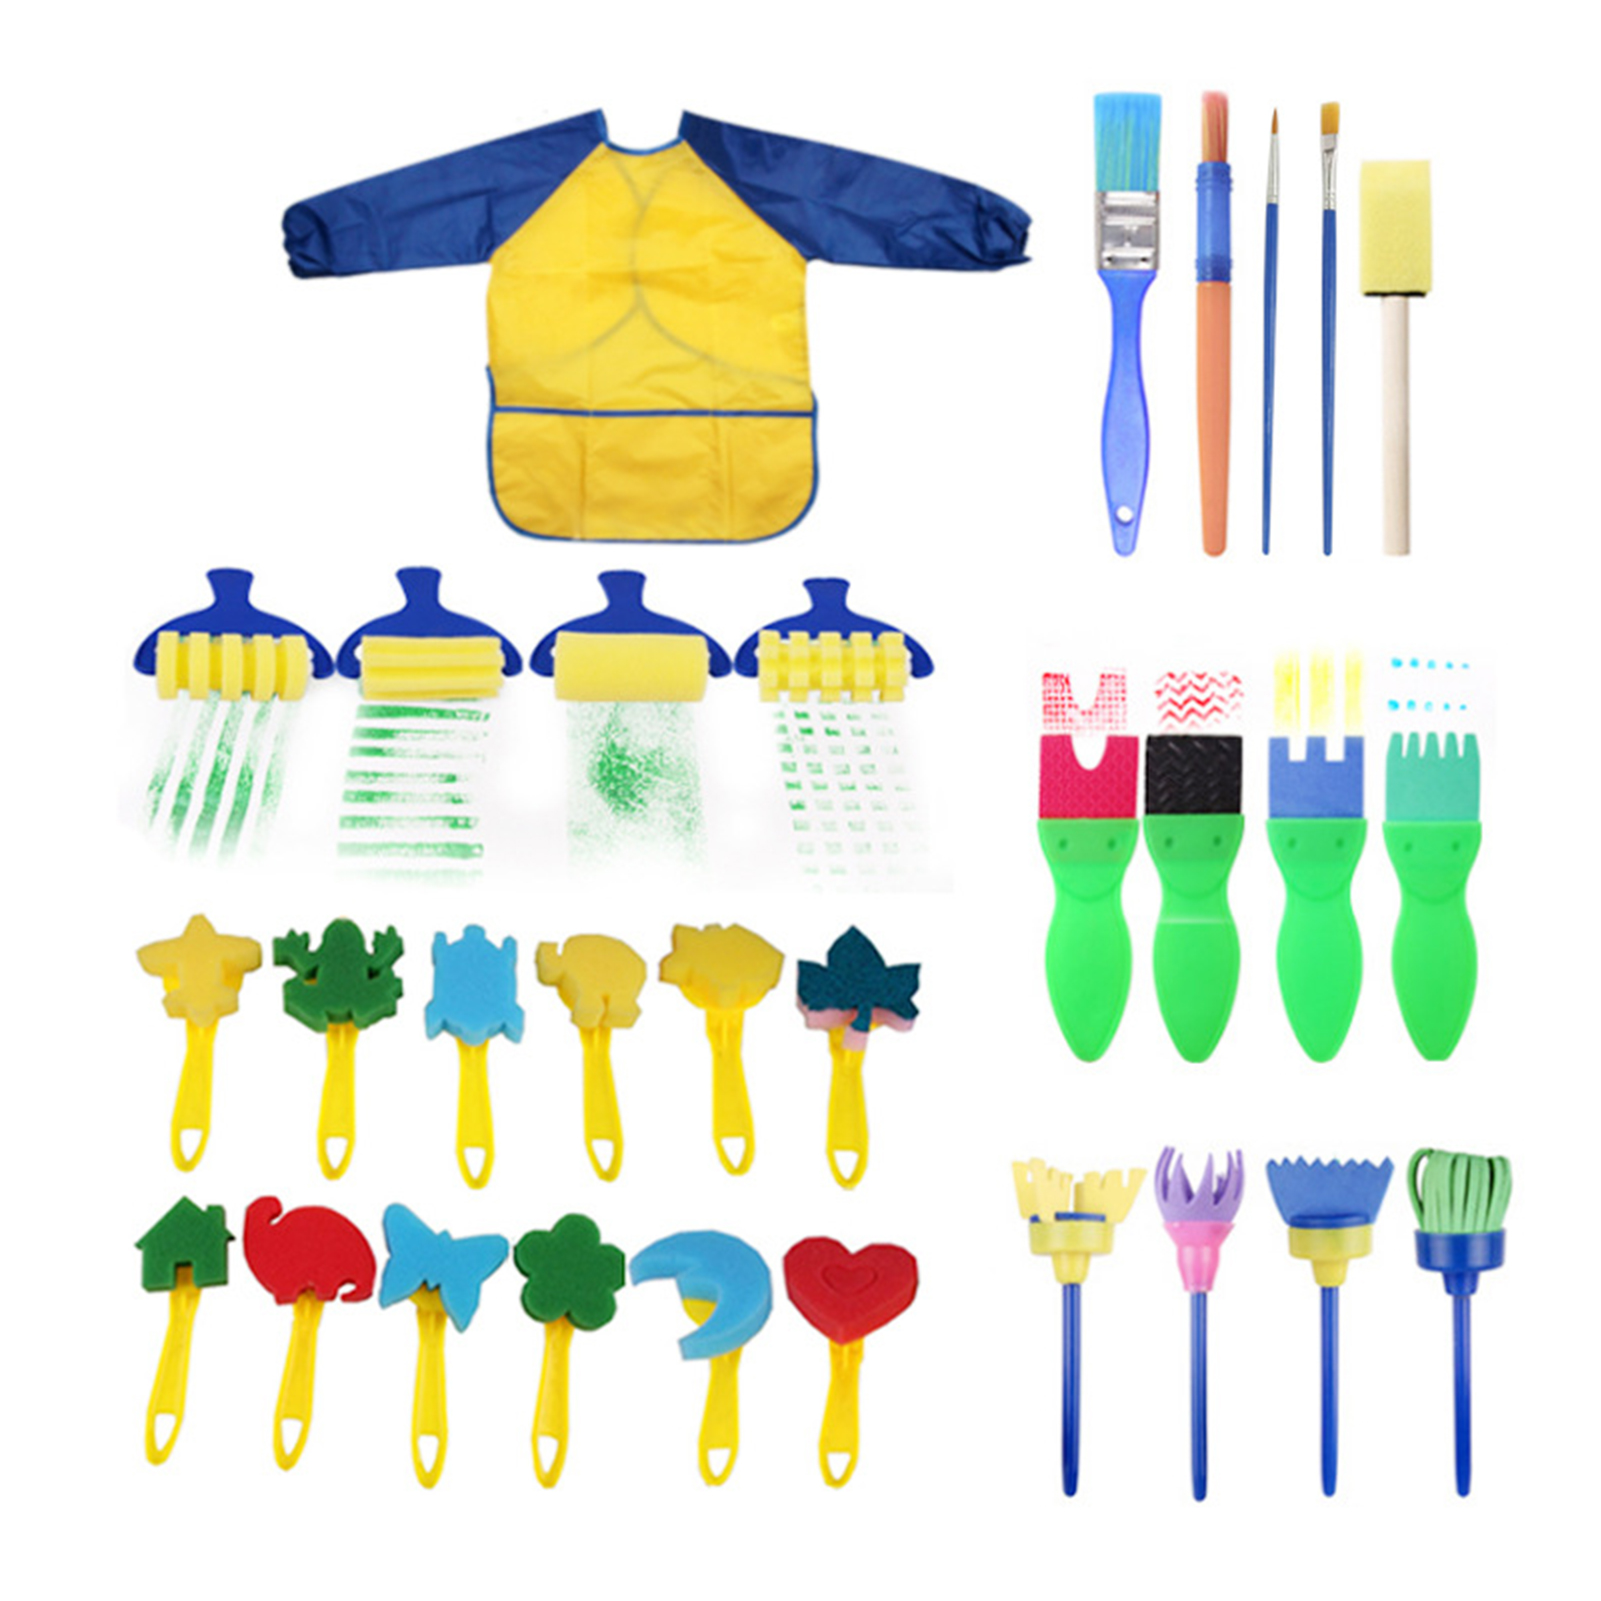 Walmeck 30PCS Paintbrushes Washable Paint Brushes Sponge Painting Brush Set with Apron for Toddler Early DIY Learning Finger Paints sponges Art Supplies Gifts for Acrylic Crafts Tempera Paints - image 1 of 7